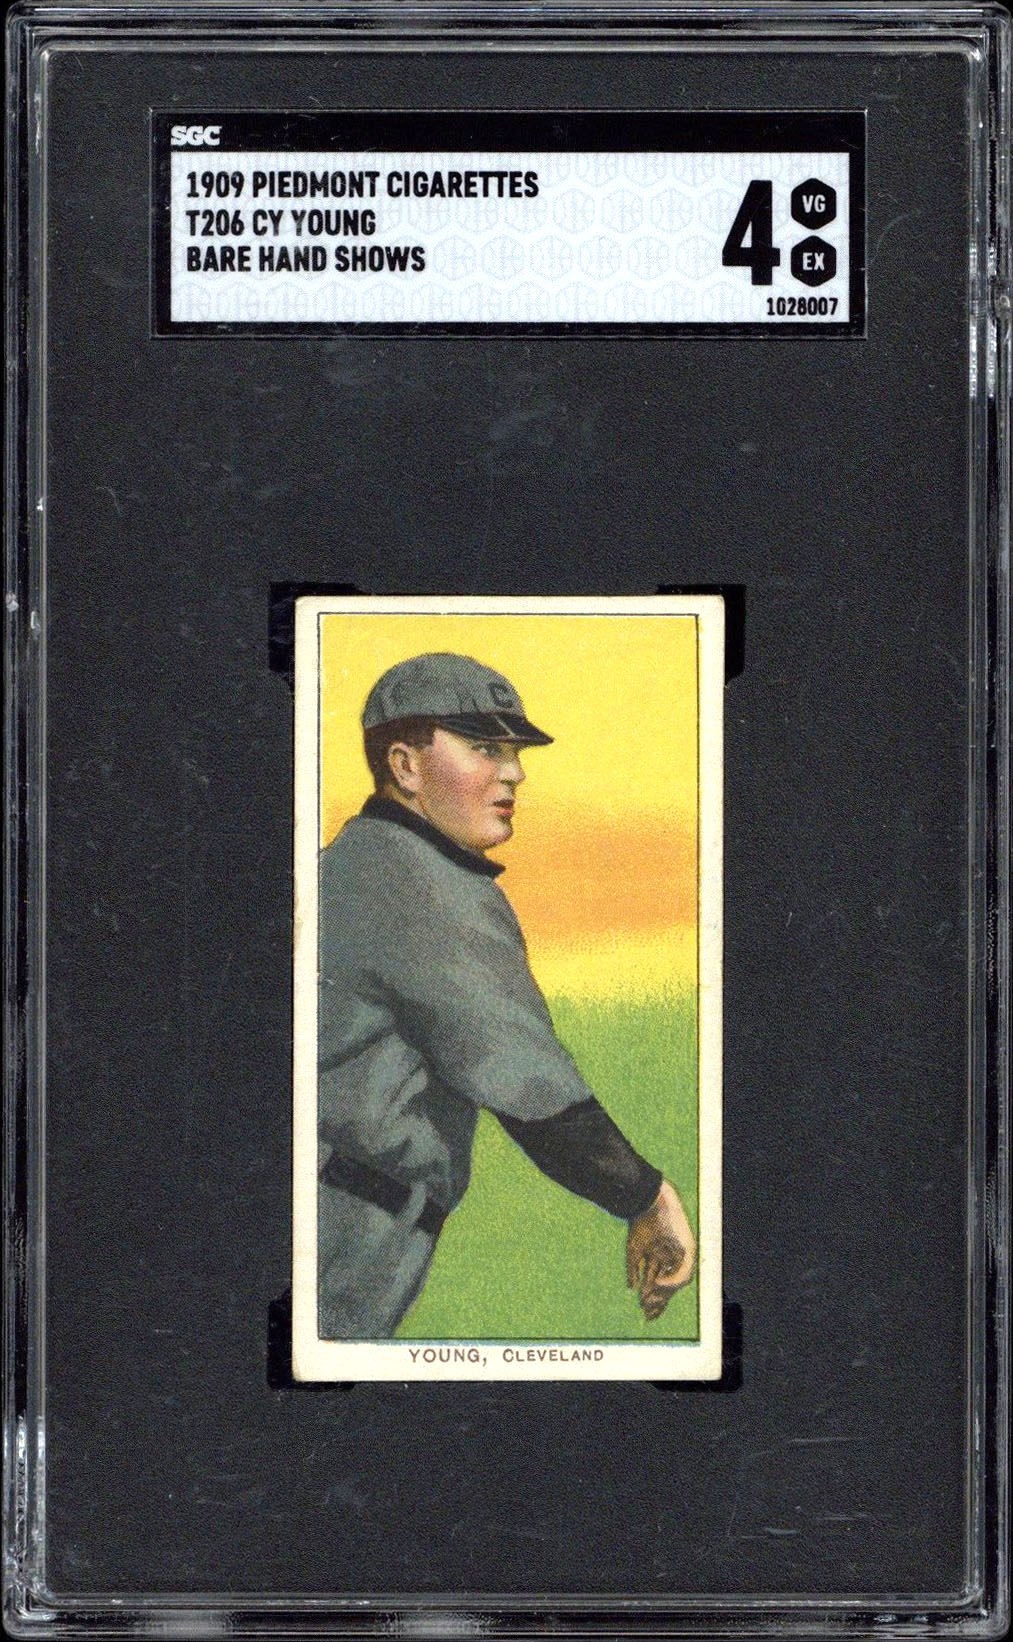 1909-11 T206 Cy Young (HOF - Bare Hand Shows) - SGC VG-EX 4